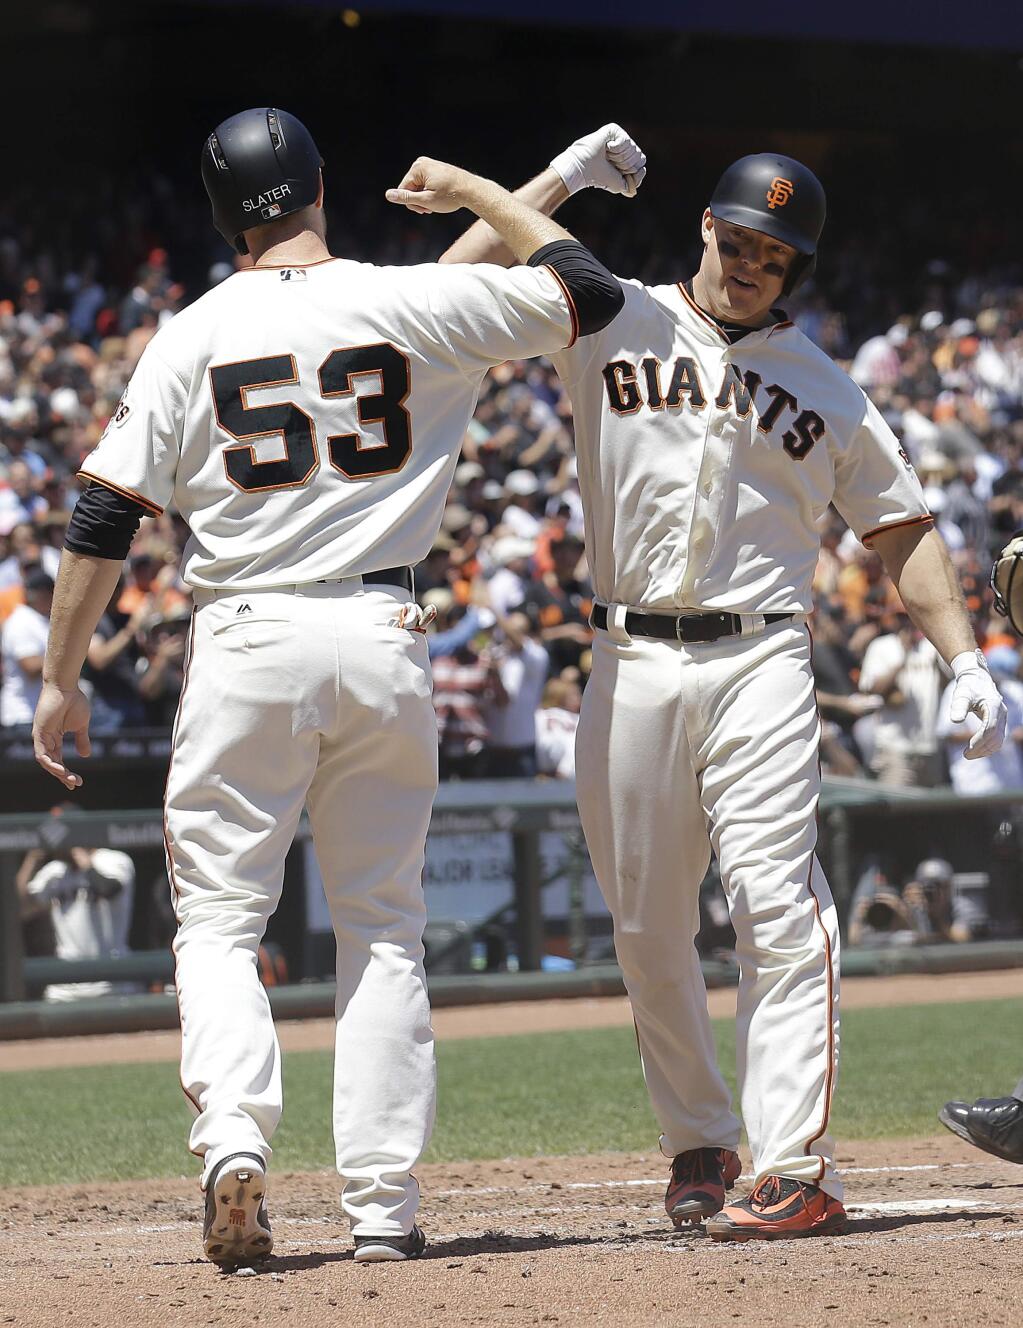 The San Francisco Giants' Nick Hundley, right, celebrates after hitting a two-run home run that scored Austin Slater (53) during the fourth inning against the Colorado Rockies in San Francisco, Wednesday, June 28, 2017. (AP Photo/Jeff Chiu)